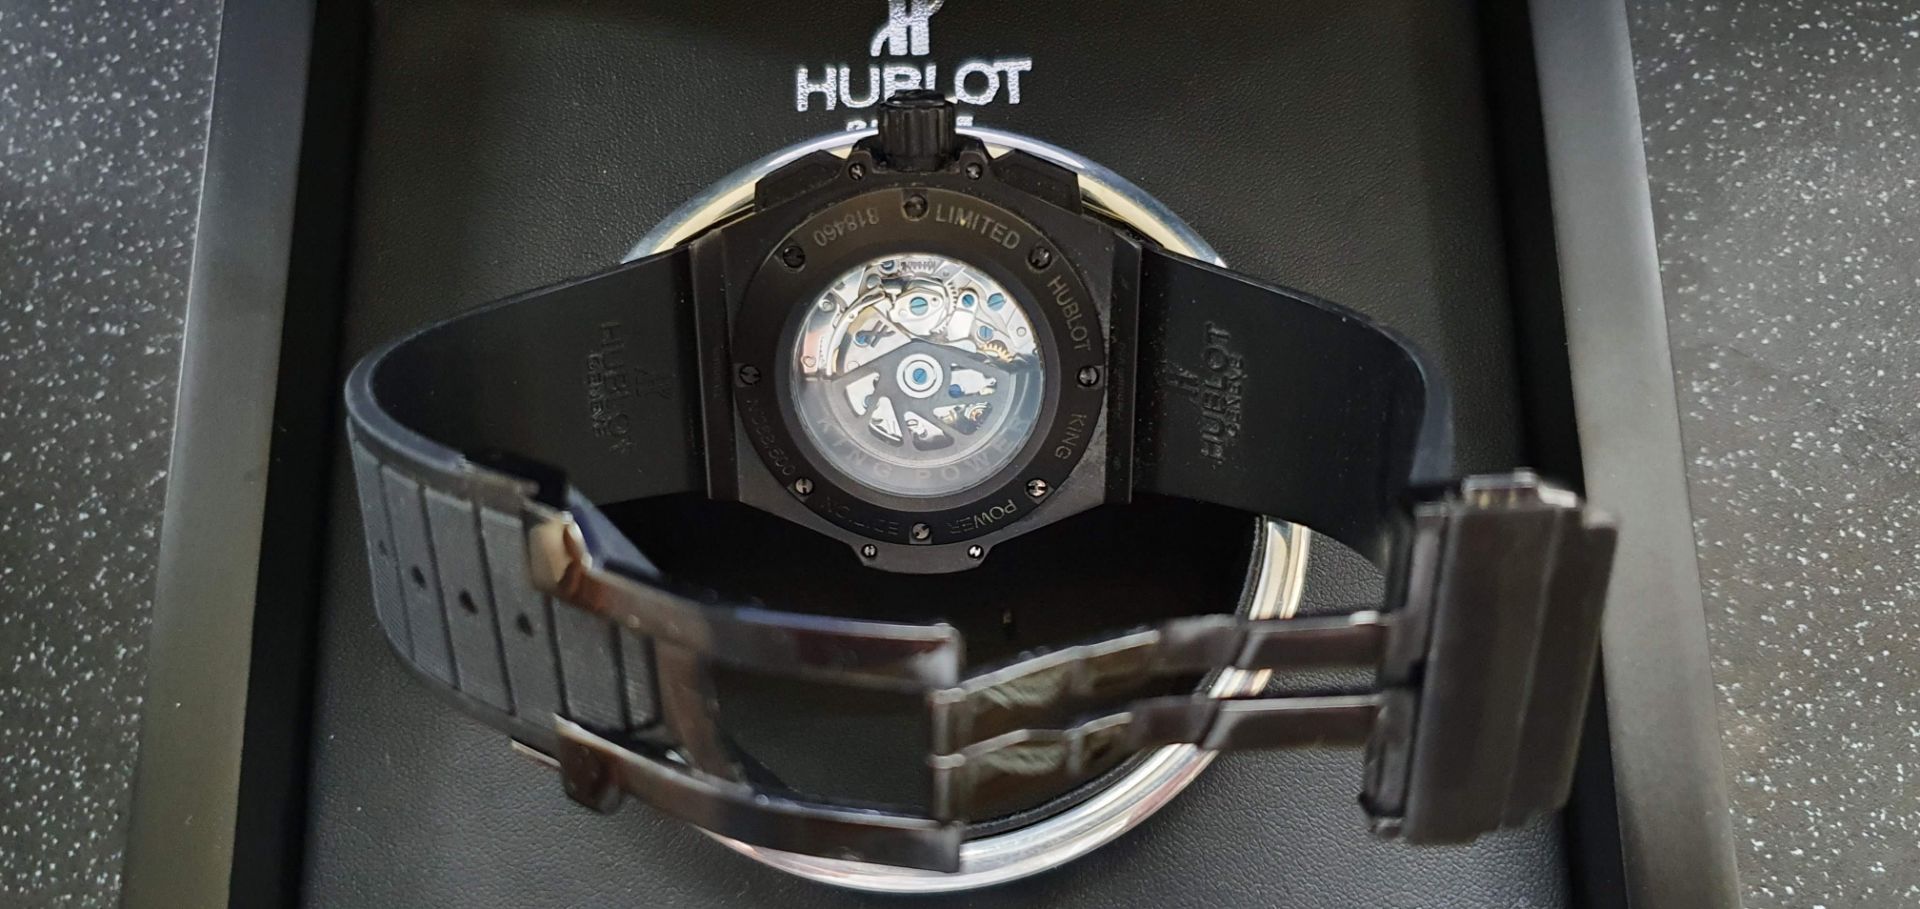 Hublot King Power Limited Edition Foudroyante Black - Assume not Genuine - Box & Booklets included - Image 6 of 10